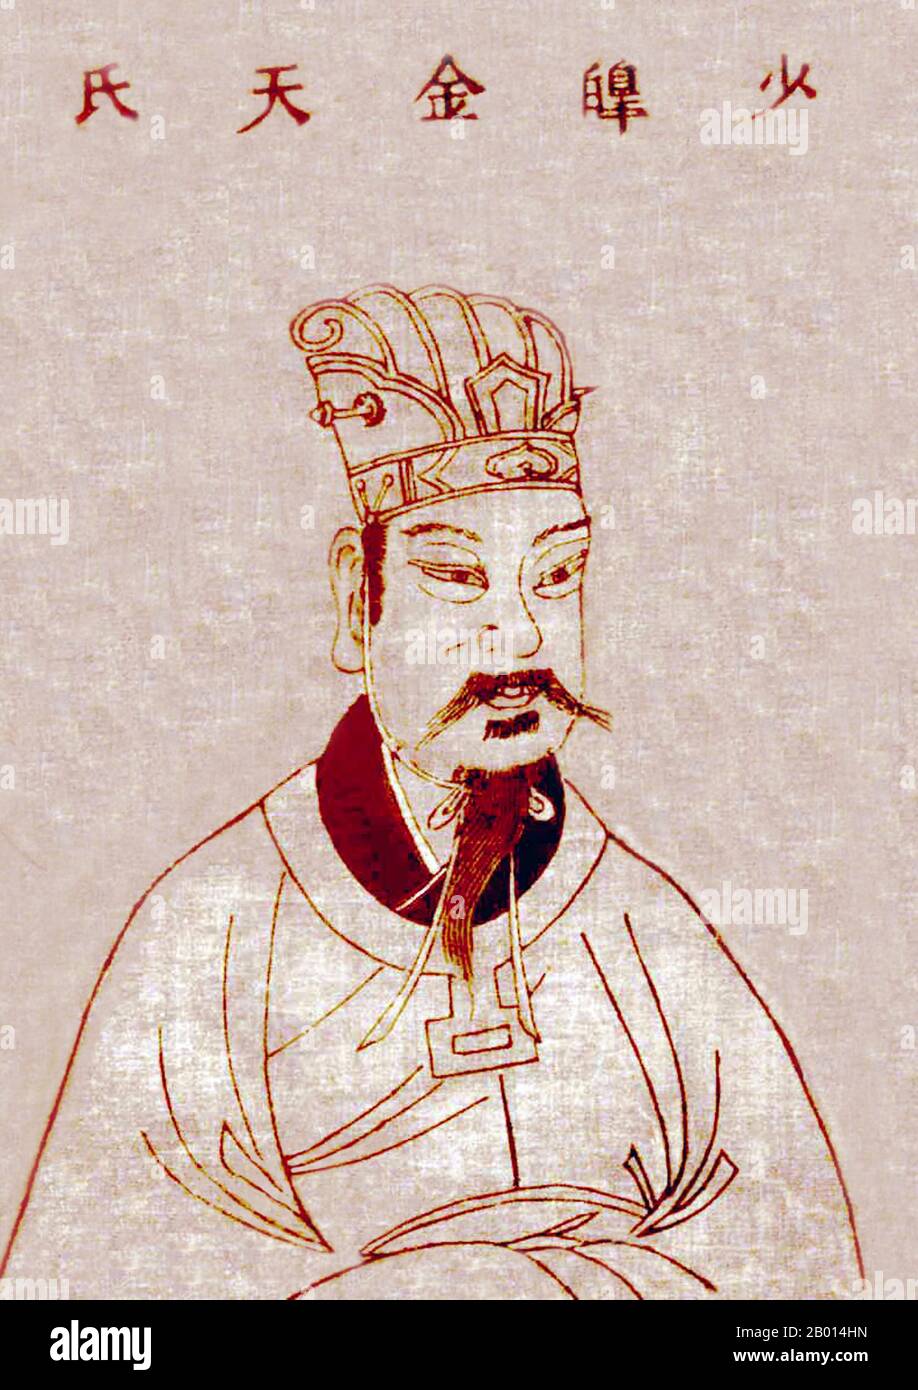 China: Emperor Shaohao (c. 2600 BCE), first of the legendary 'Five  Emperors'. Hanging scroll painting. Emperor Shaohao, also known as Shao Hao,  Jin Tian or Xuanxiao, was a mythical ruler usually identified